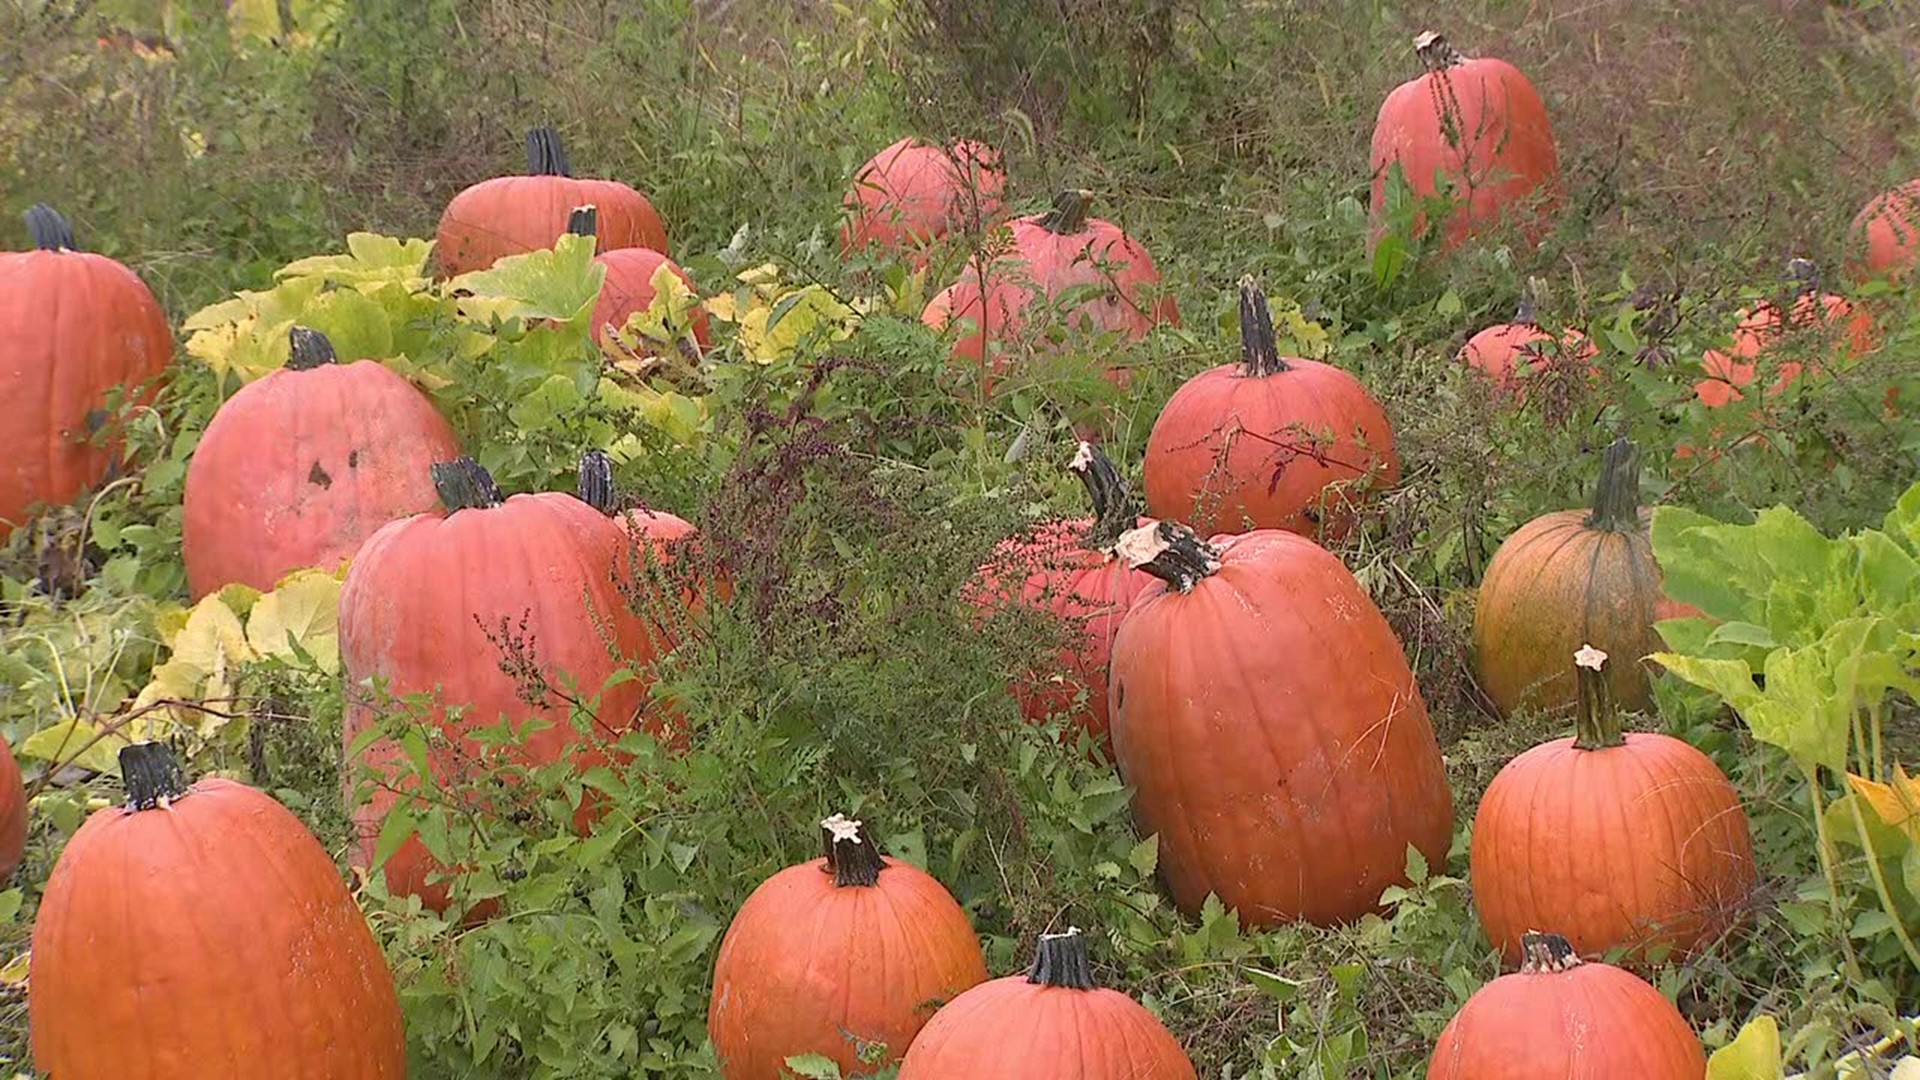 Fall starts later this week, and that means many farms are getting ready to welcome visitors to their pumpkin patches.